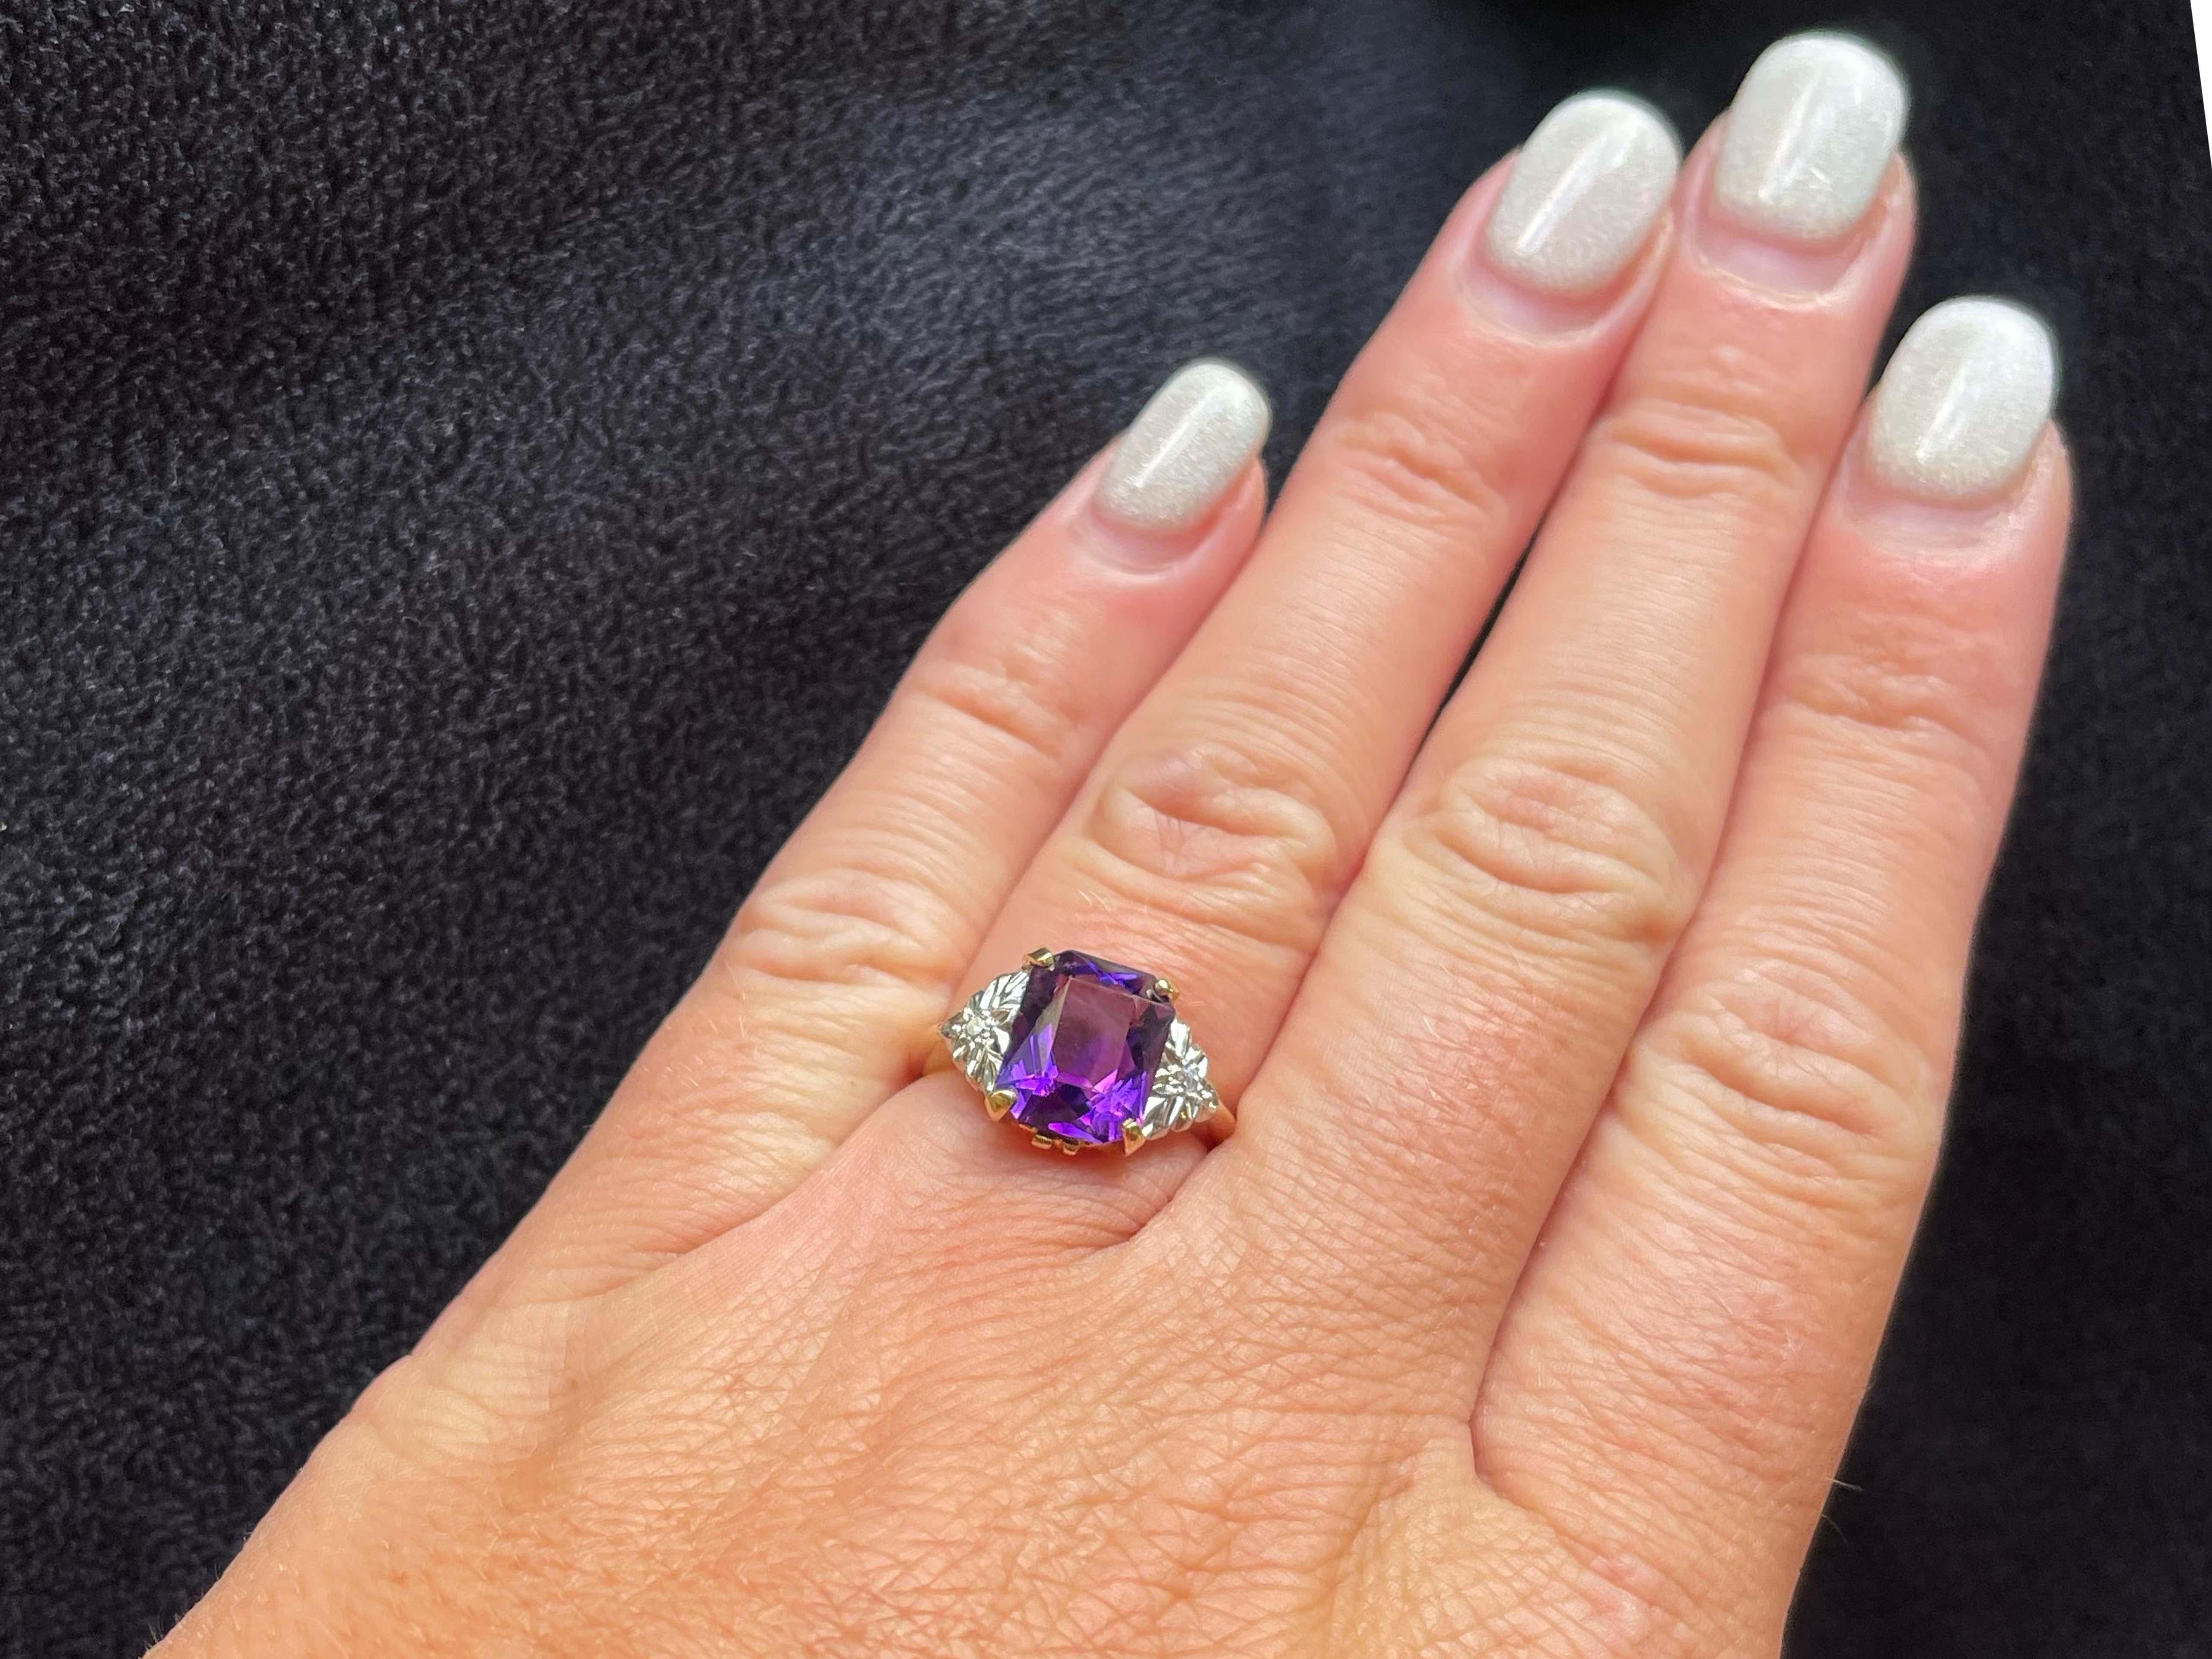 Ring Specifications:

Metal: 14k Yellow and White Gold

Total Weight: 3.3 Grams

Diamond Count: 2 single cut diamonds
​
Diamond Clarity: VS
​
​Diamond Color: G
​
​Diamond Carat Weight: 0.02 carats
​
Gemstone: 1 purple radiant cut amethyst 

​Ring